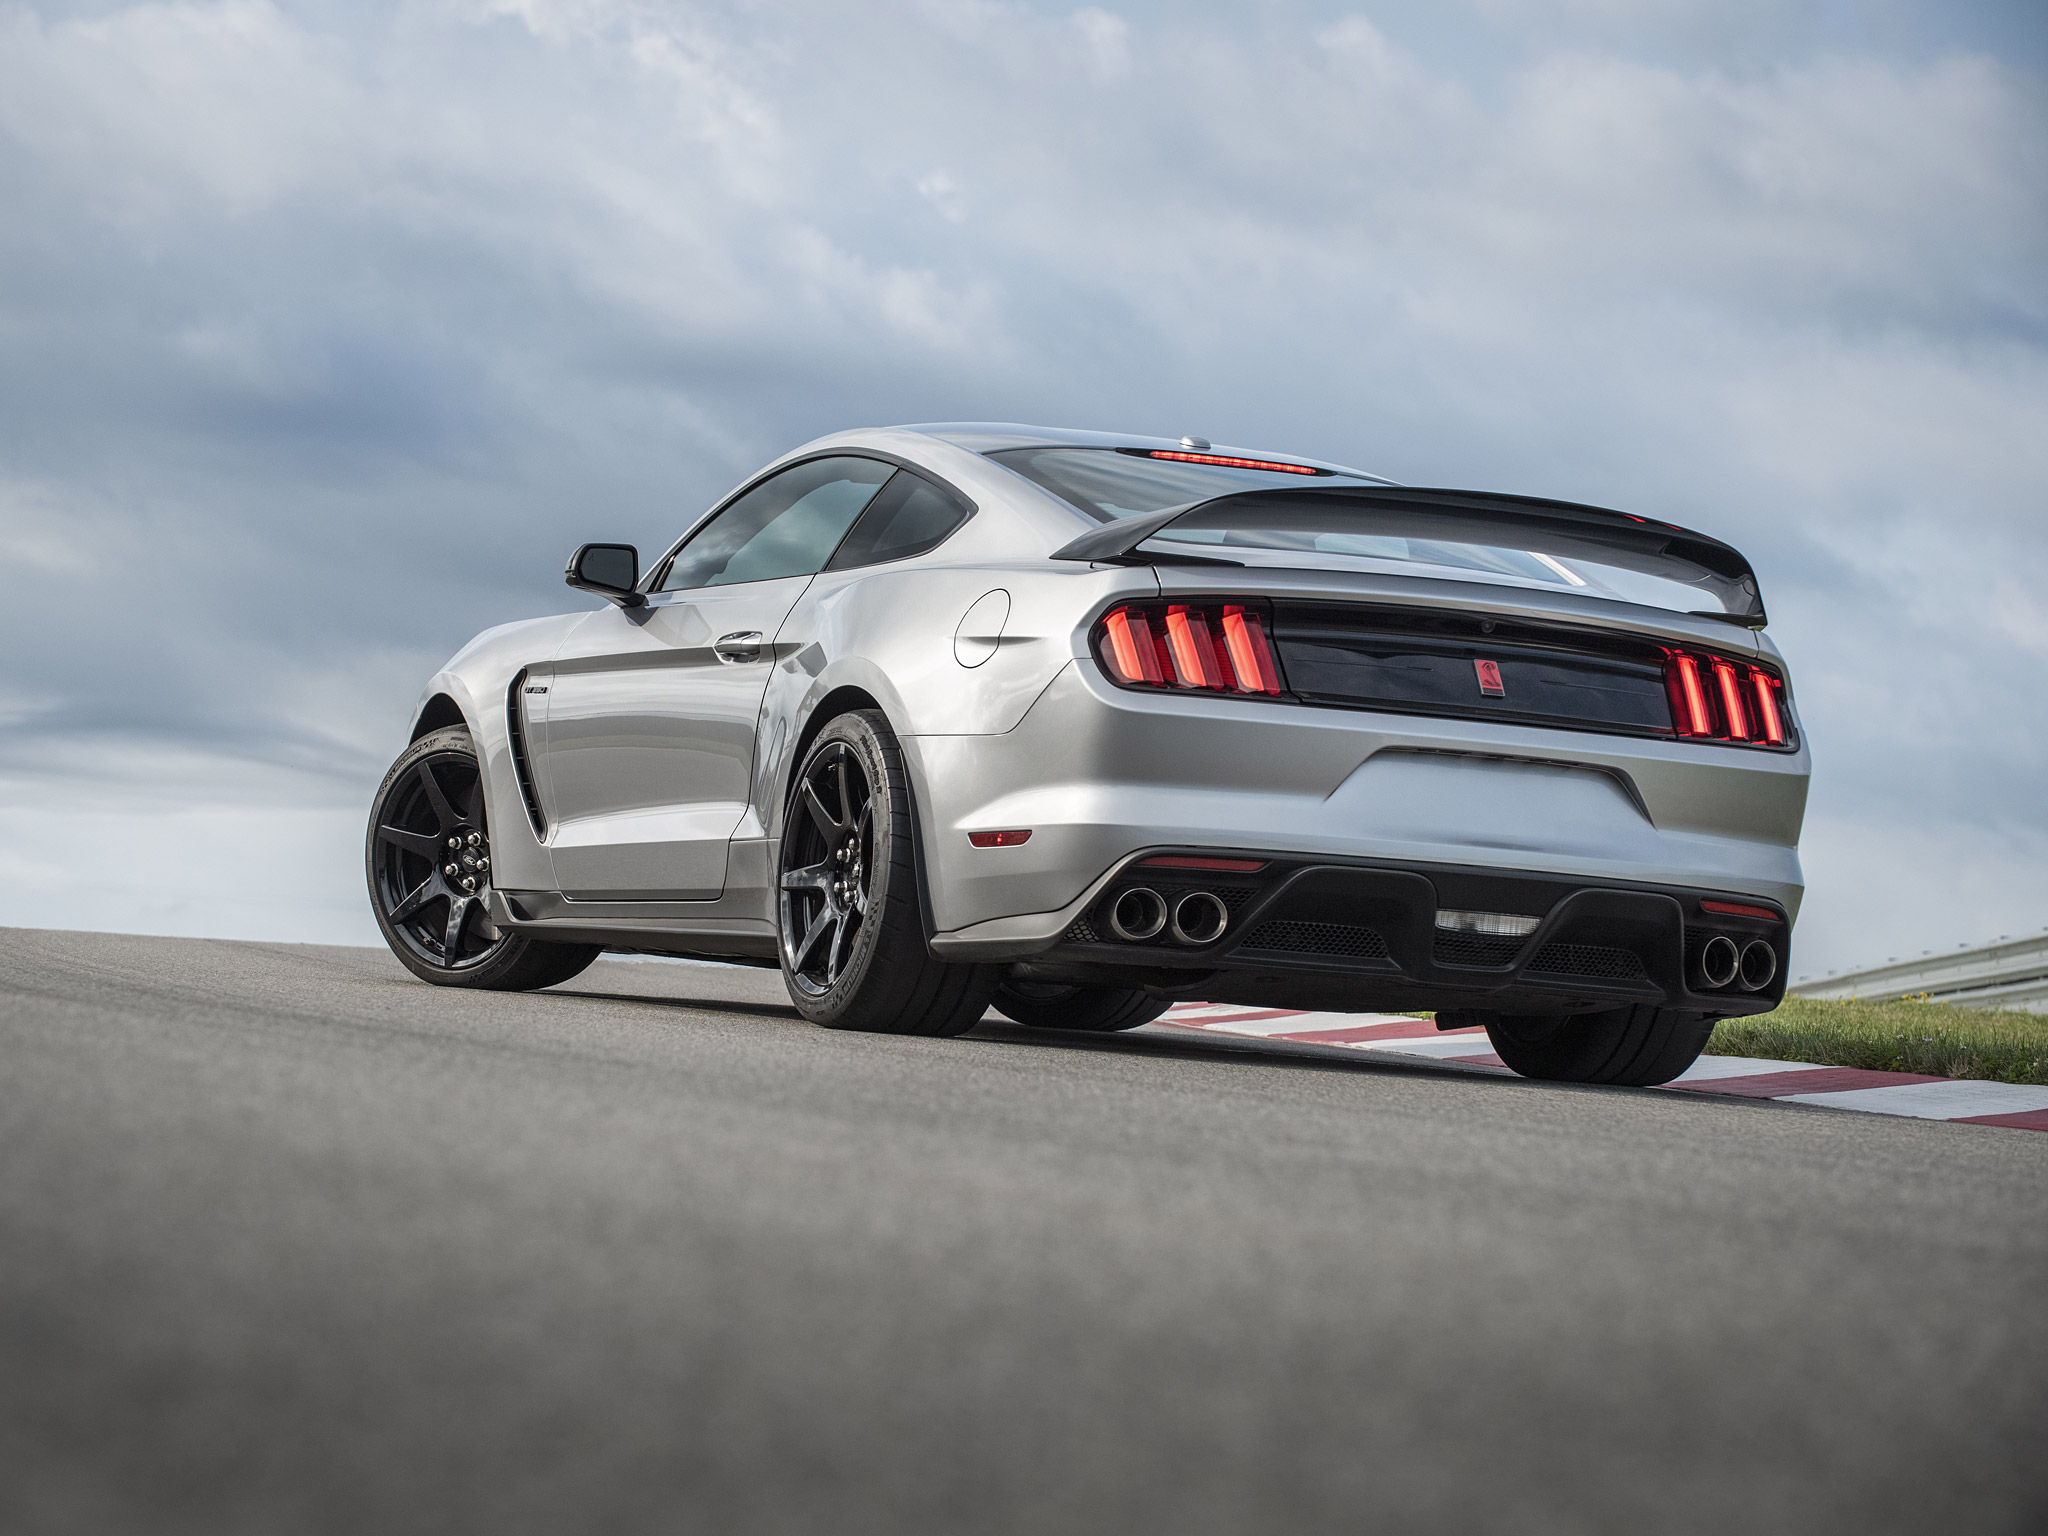  2020 Ford Mustang Shelby GT350R Wallpaper.